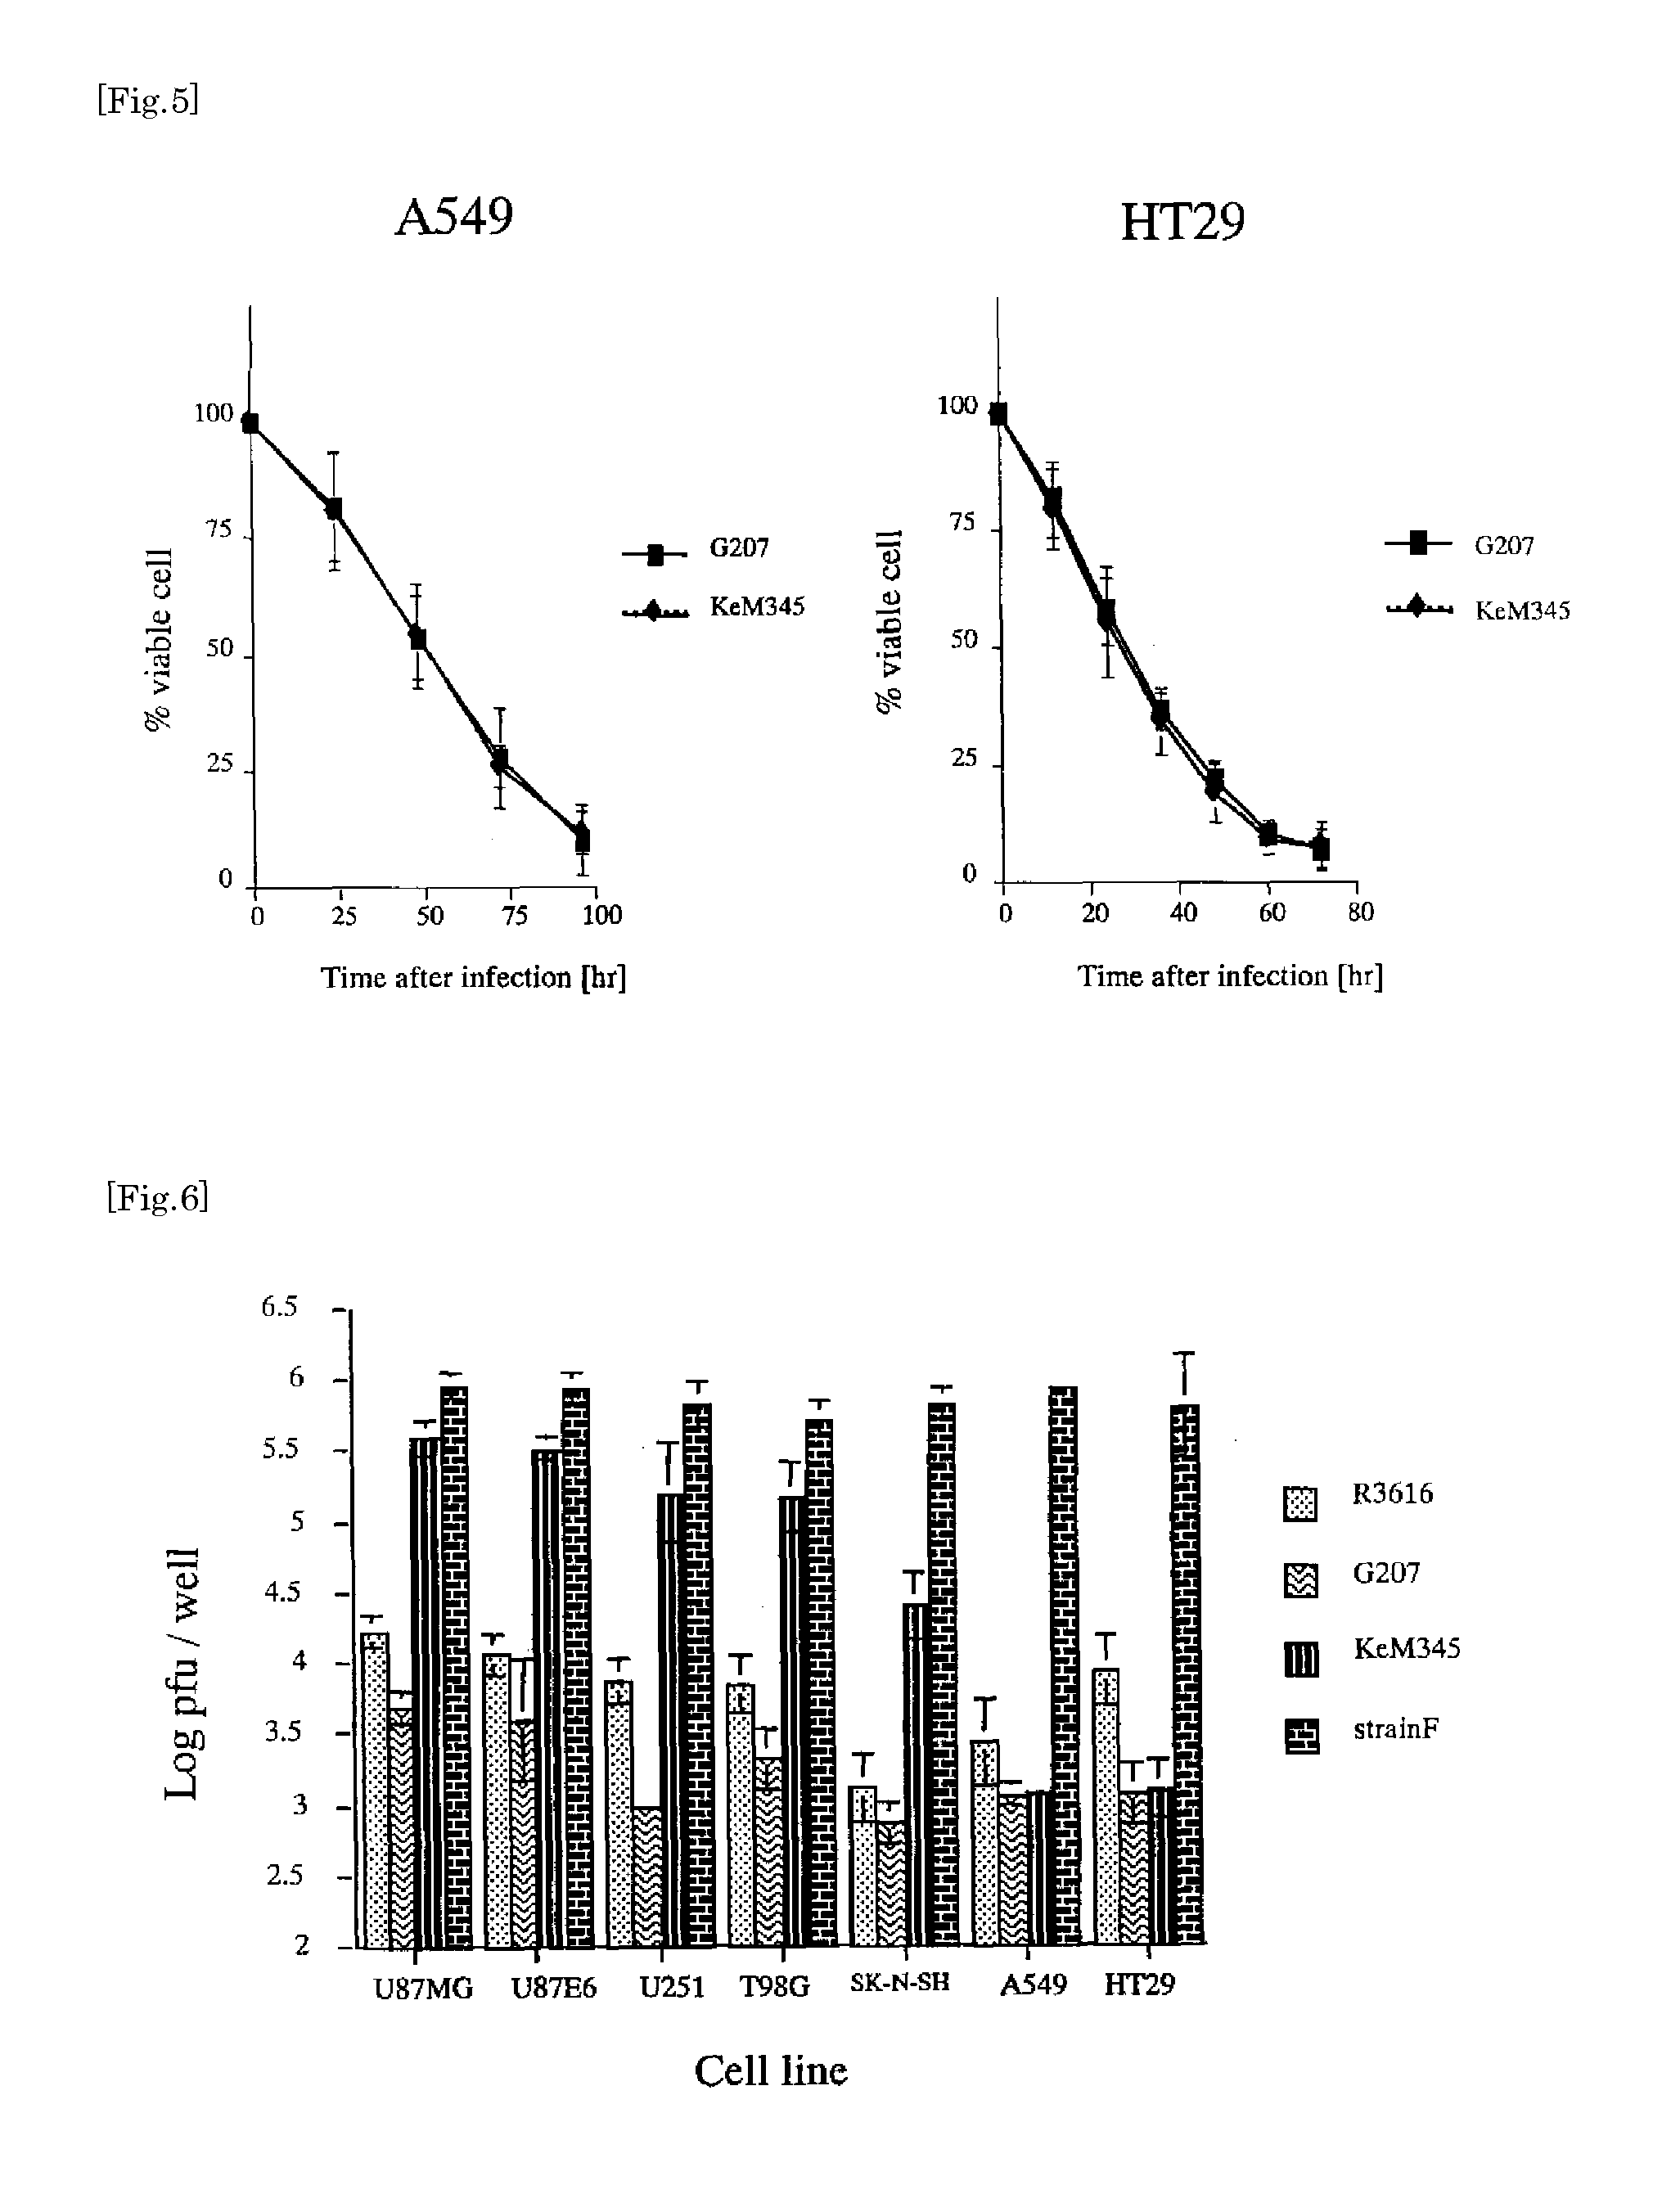 HSV with a Musashi promoter regulating γ34.5 and ribonucleotide reductase expression